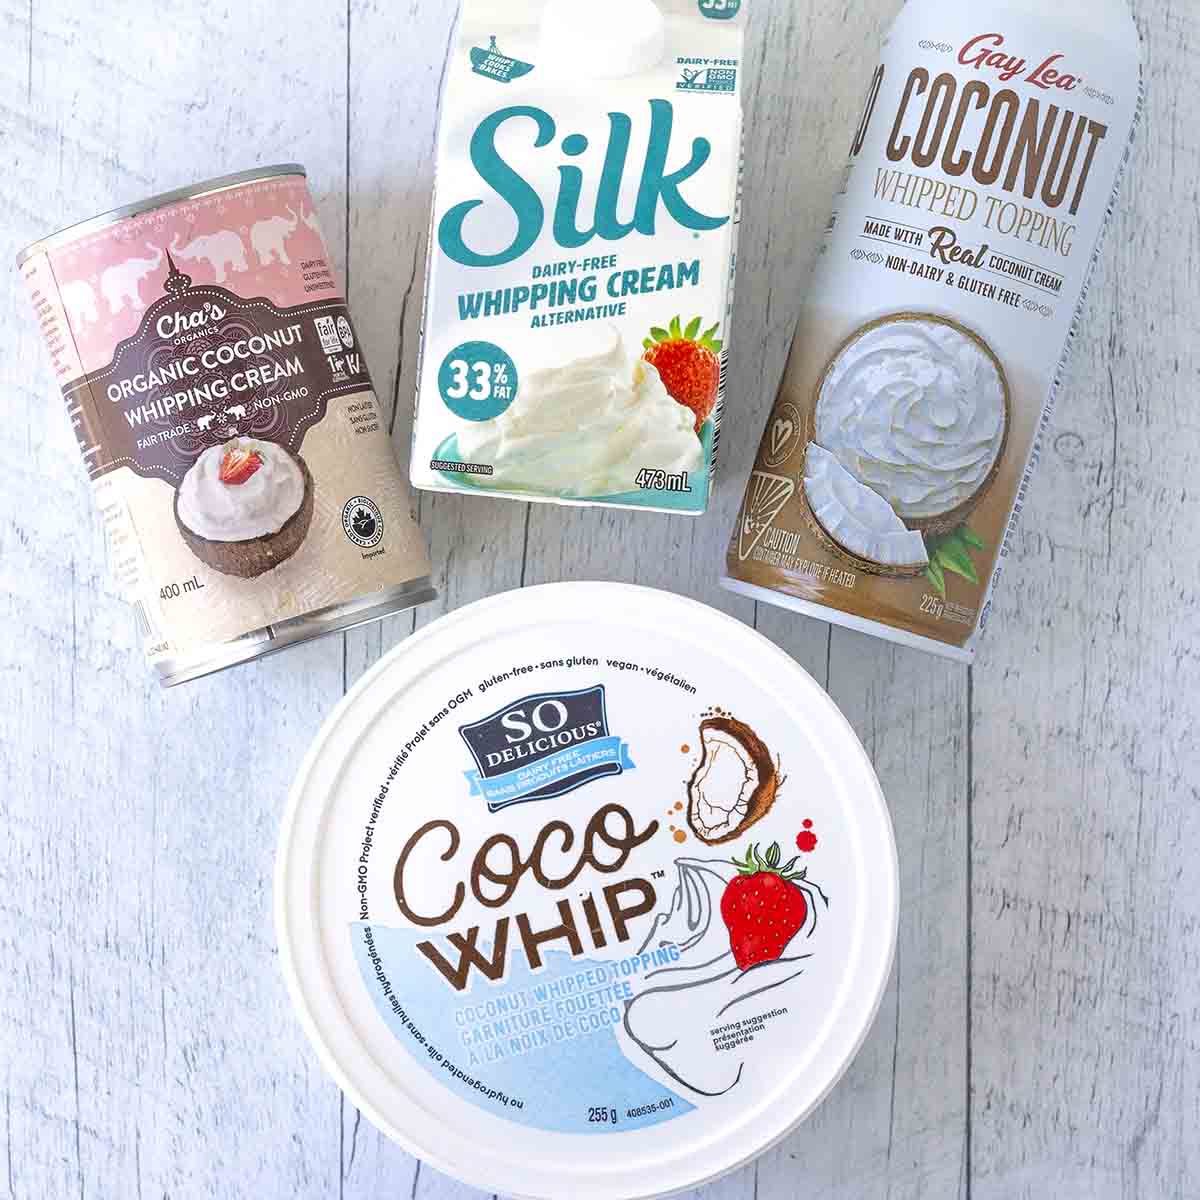 Vegan Outreach - Vegan Cool Whip? We're sold ✓ Found at Sprouts Farmers  Market